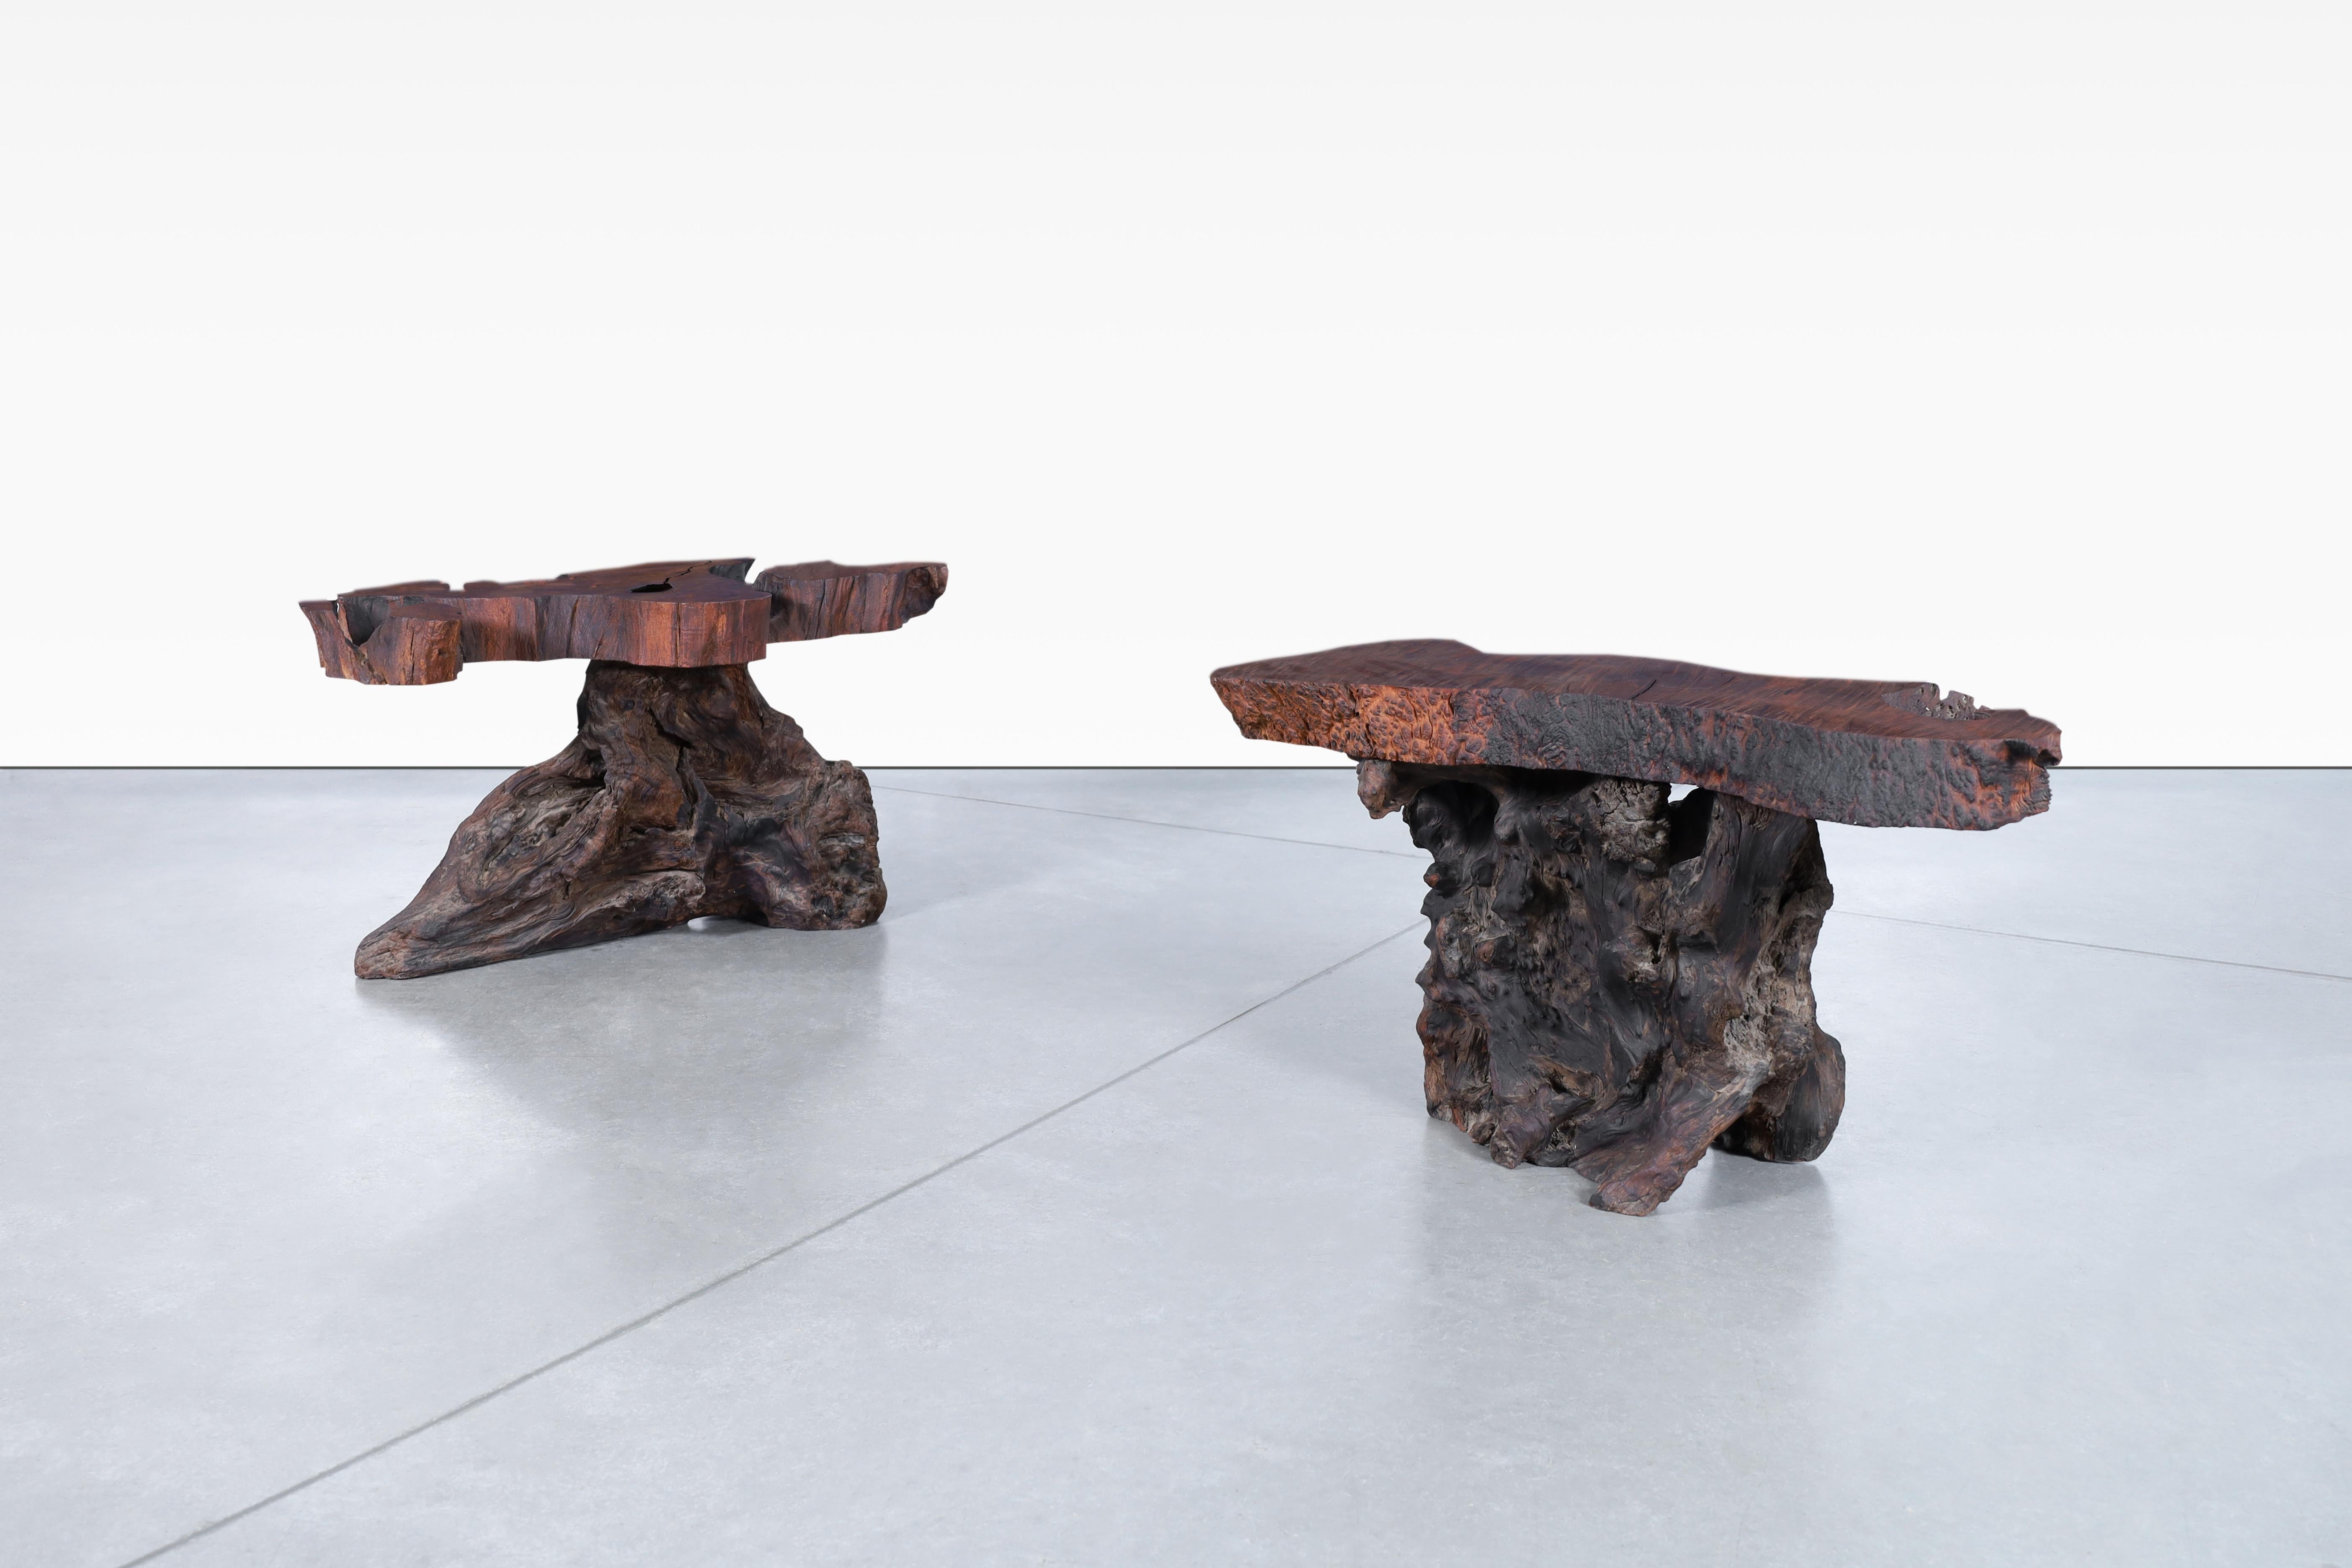 Fabulous vintage live edge redwood burl side tables, designed in the United States, circa 1960s. These redwood tables are unique, handmade designs. The live edge design captures the raw, unrefined essence of the wood, adding a touch of nature's